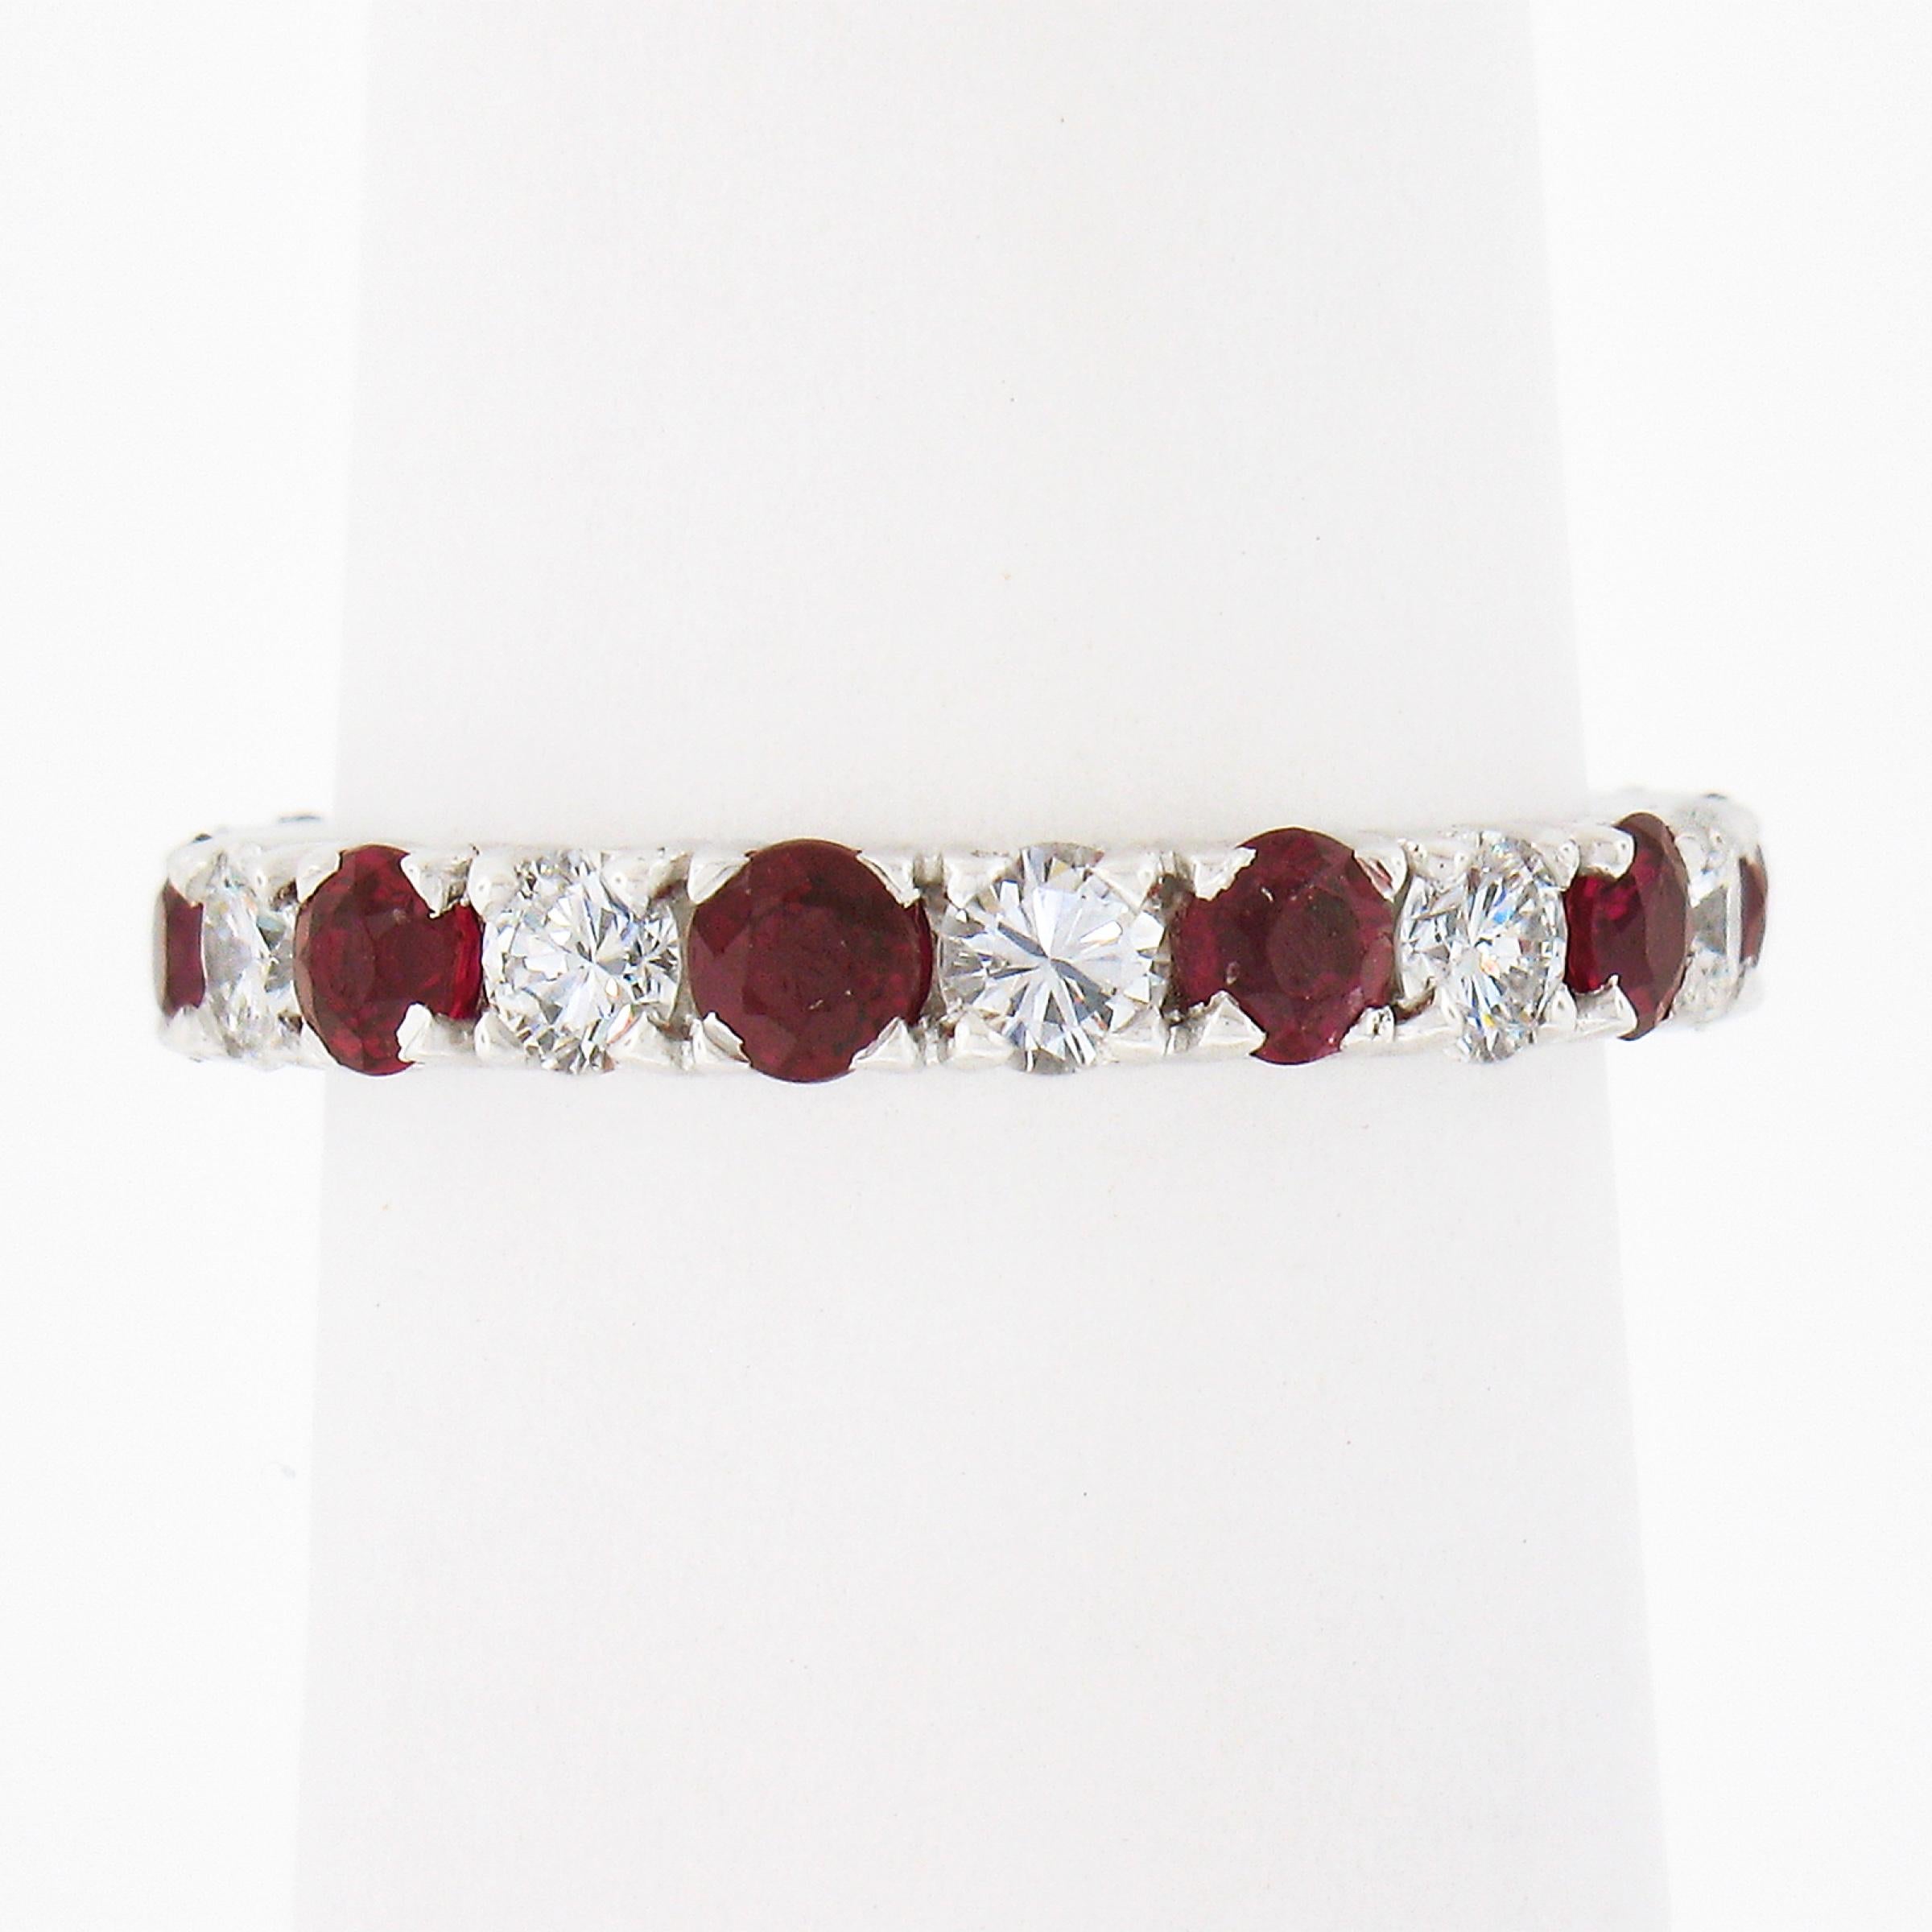 This lovely vintage ruby and diamond eternity band/ring is crafted in solid 18k white gold. It features fine rich red rubies that alternate with the fiery and brilliant diamonds, giving the ring this incredible color contrast between the stones that